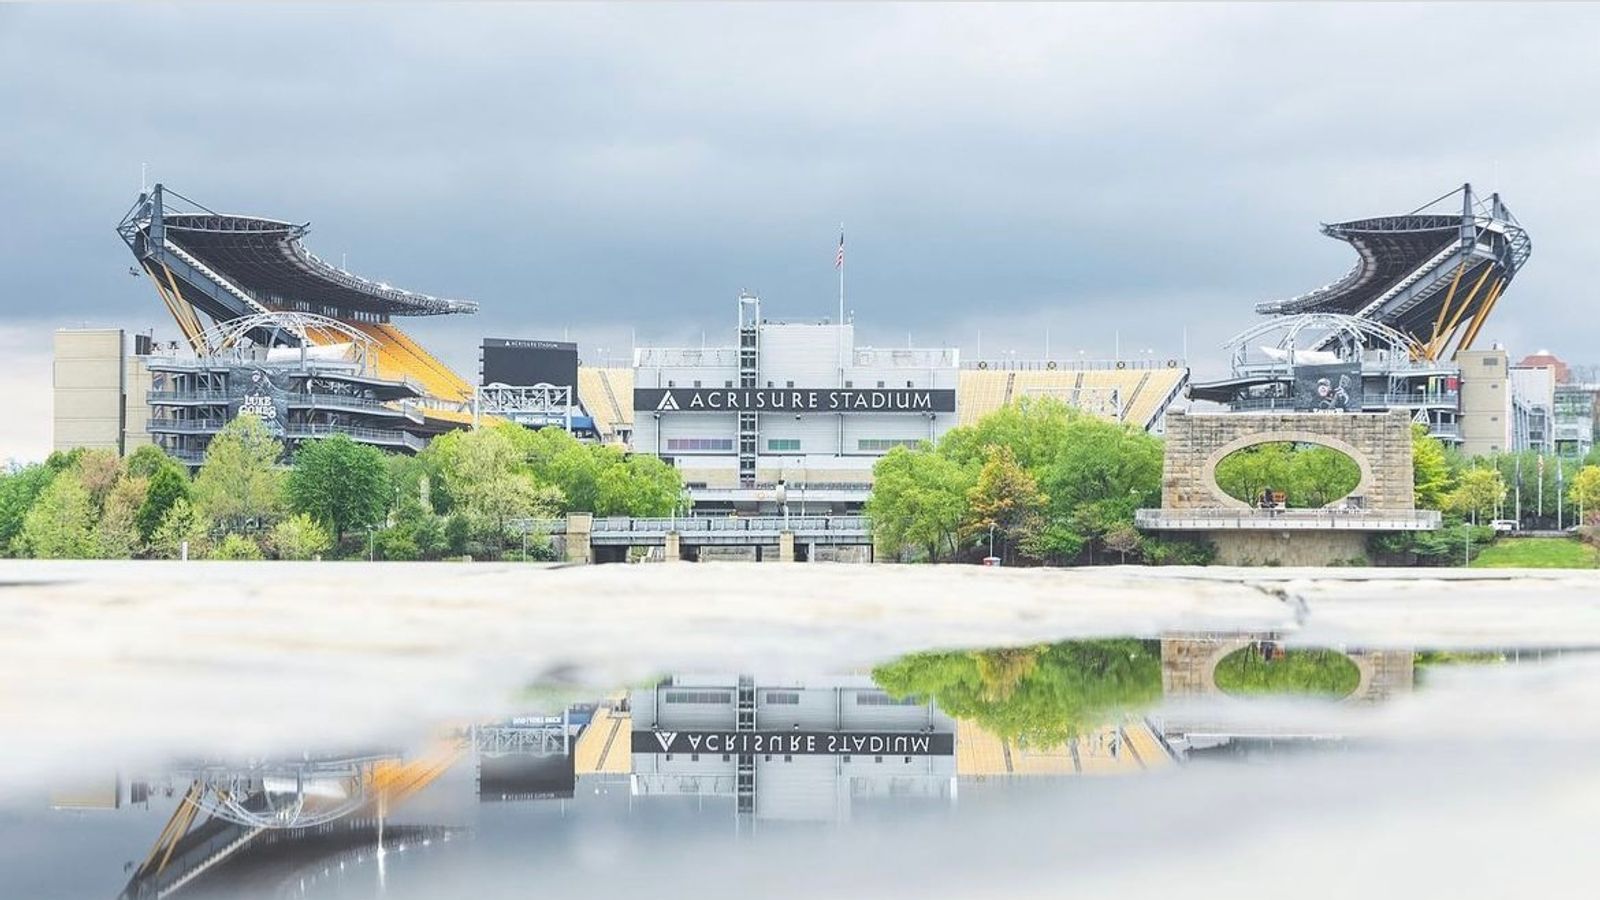 Steelers' David Morehouse, Pennsylvania Governor, And Other Pieces In Place  For Massive Upgrades To Acrisure Stadium